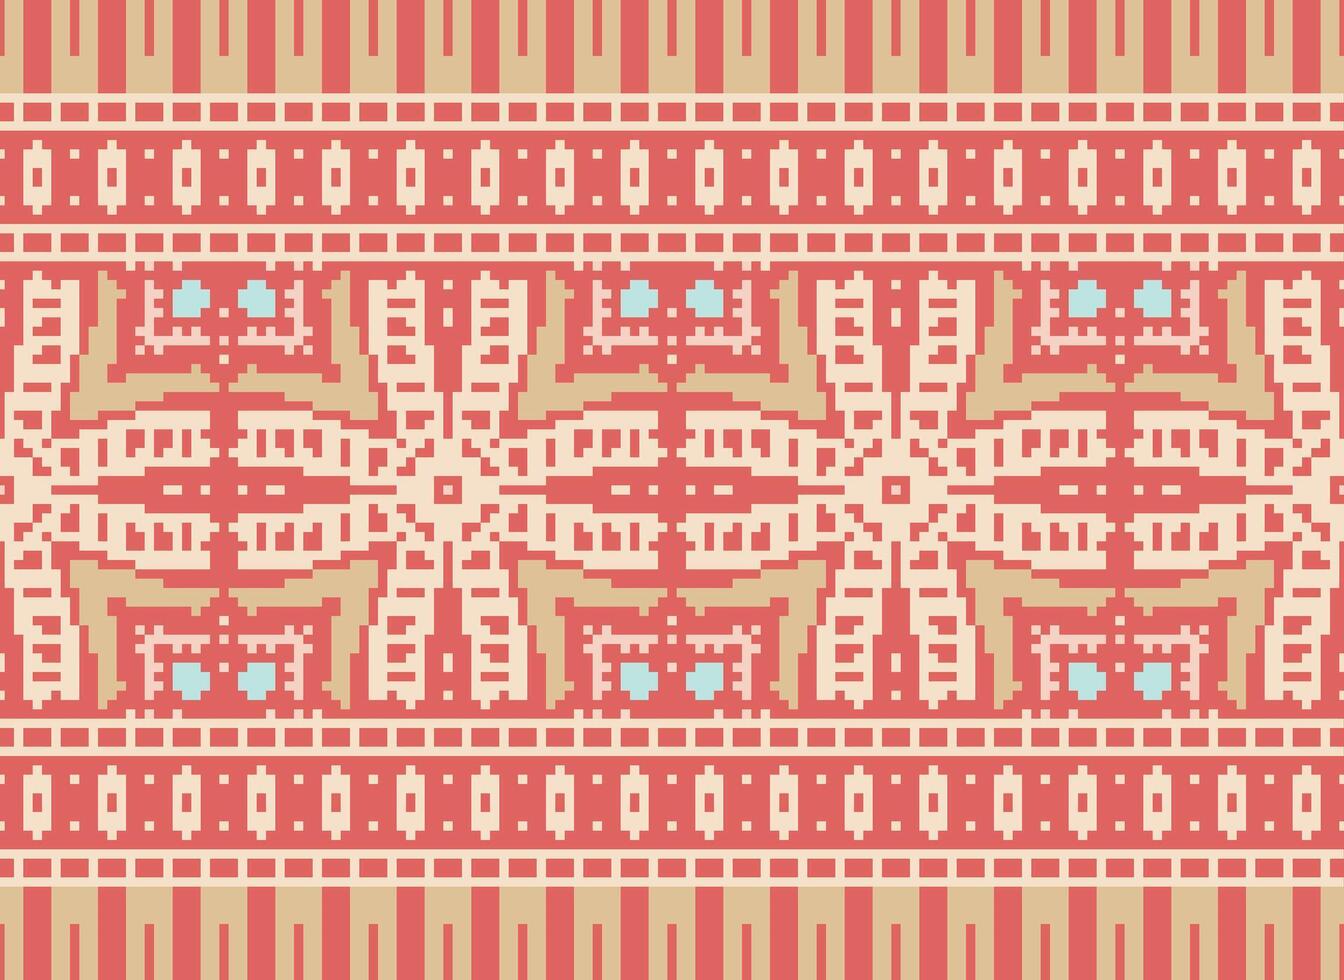 Cross Stitch Border. Embroidery Cross Stitch. Ethnic Patterns. Geometric Ethnic Indian pattern. Native Ethnic pattern.Texture Textile Fabric Clothing Knitwear print. Pixel Horizontal Seamless Vector. vector